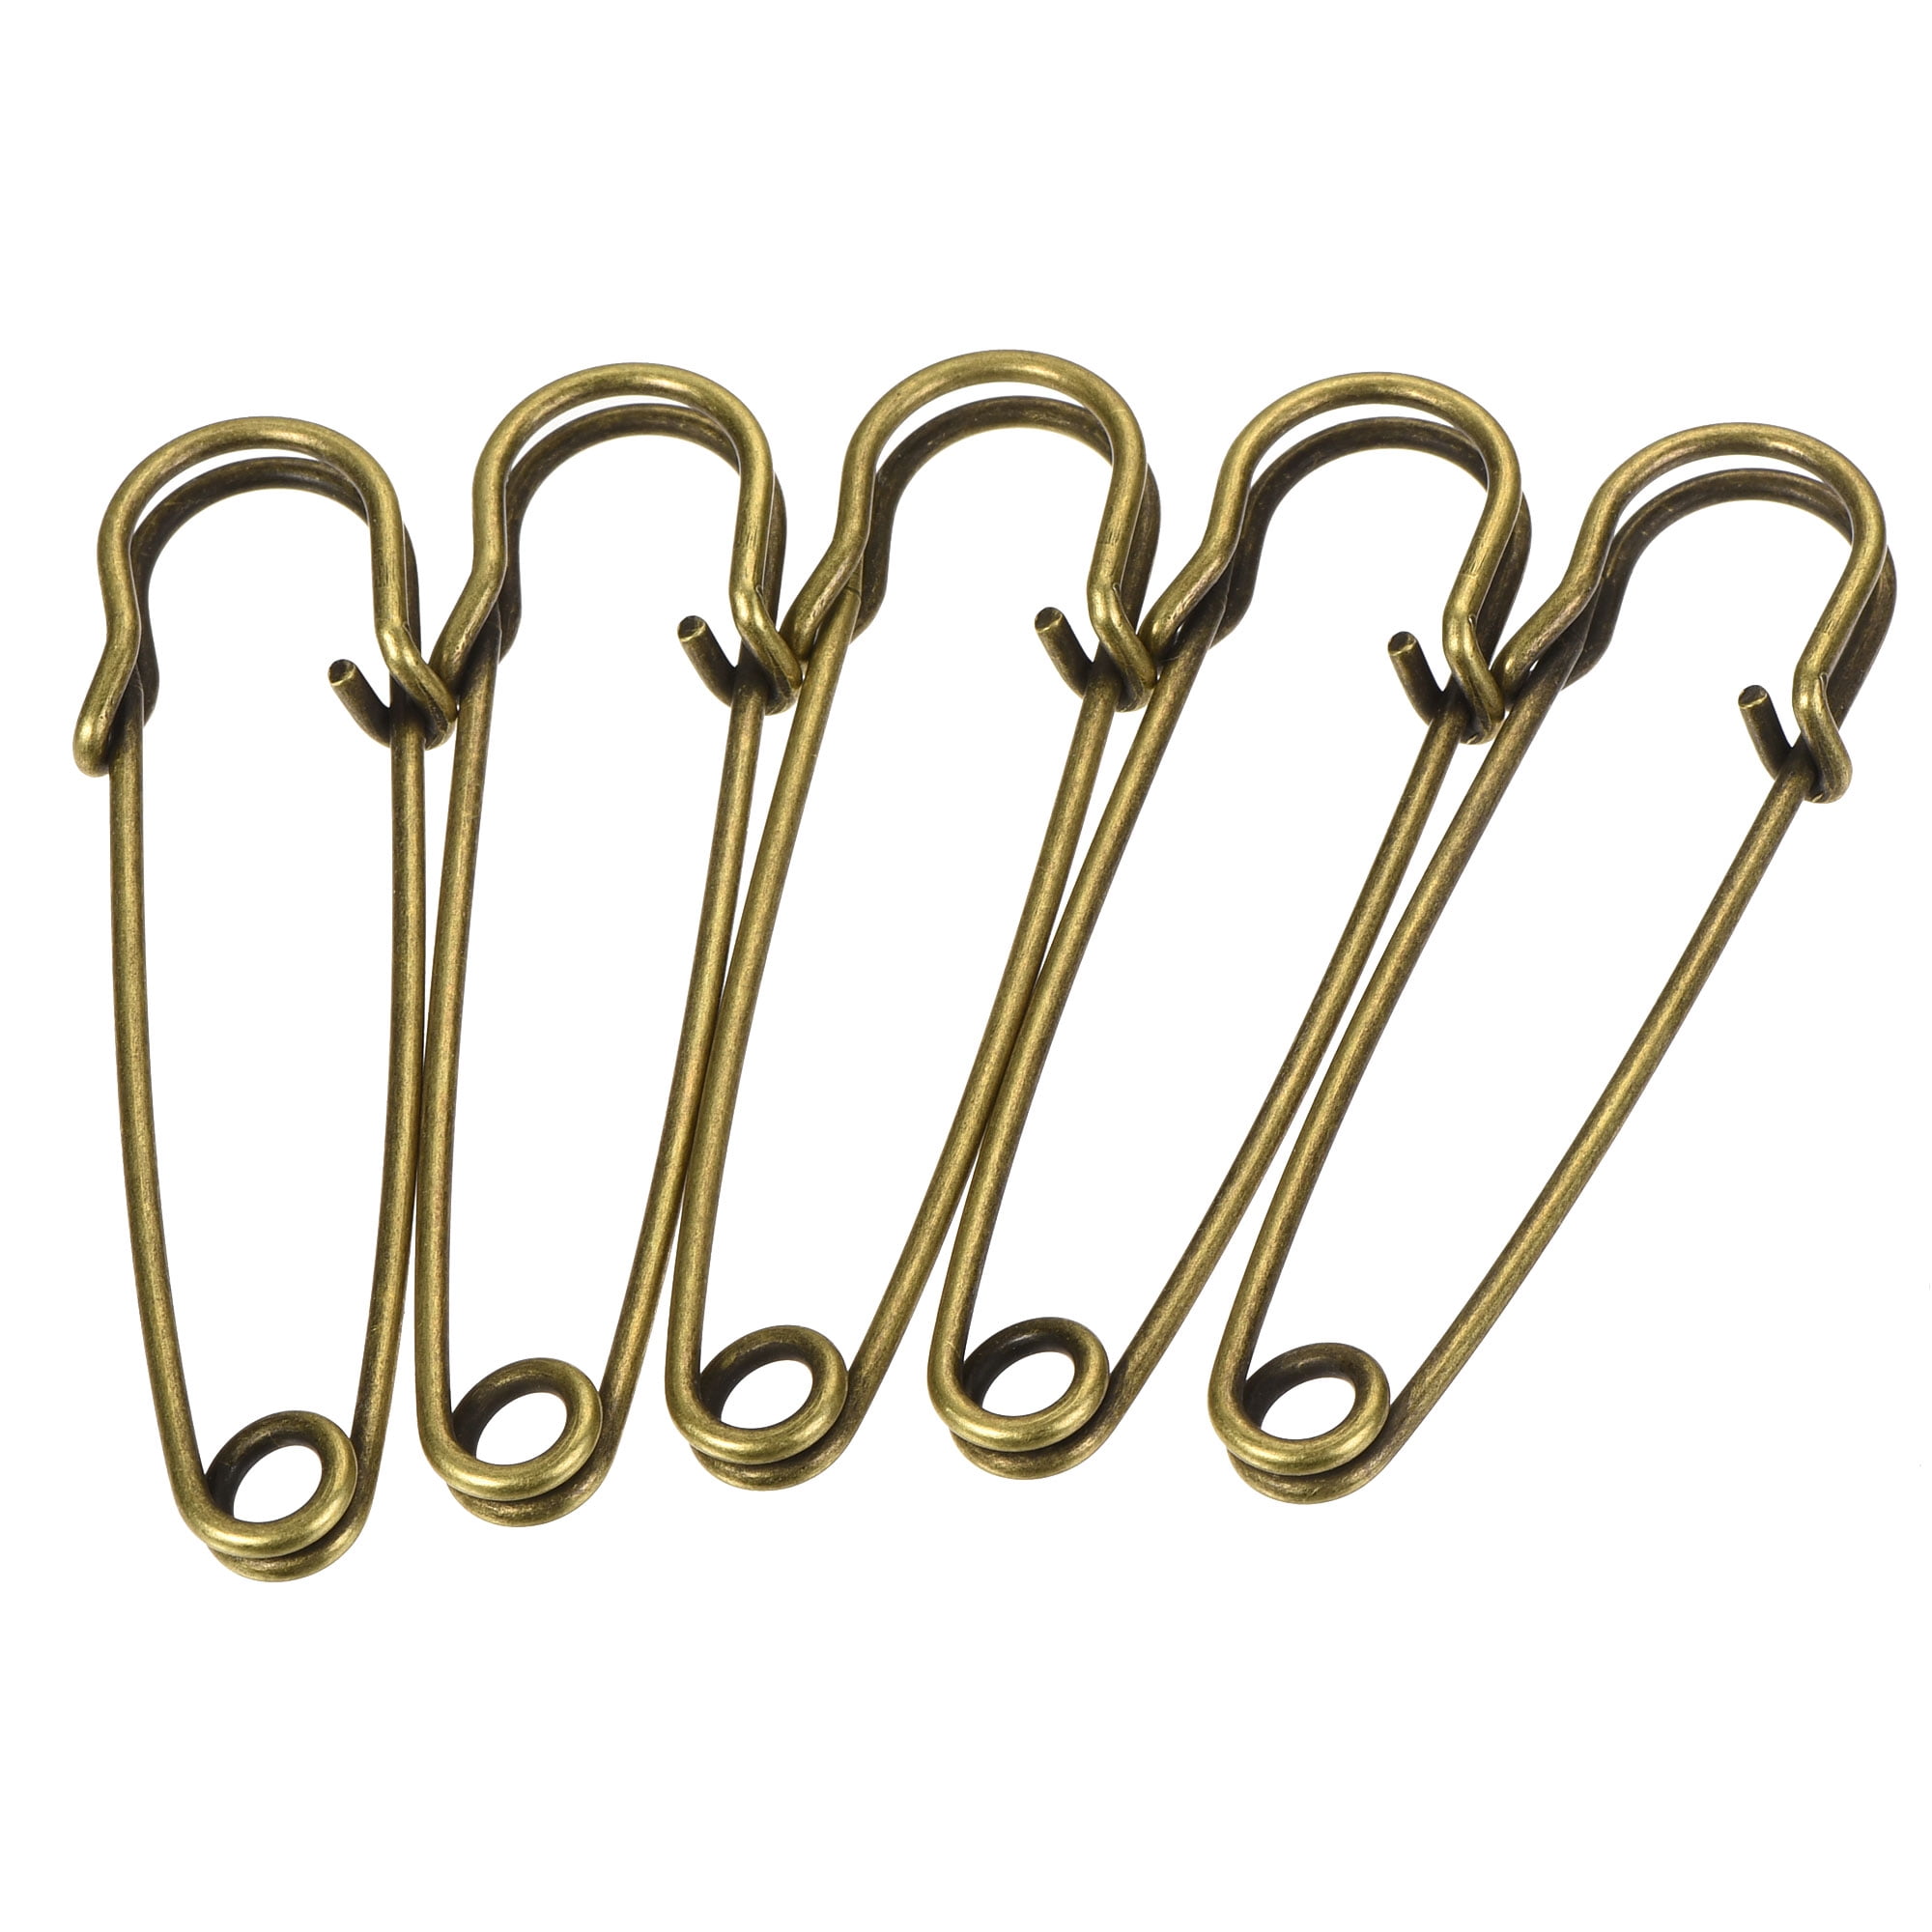 Bundle of 70 Pins Gold Safety Pin Sewing Crafting SAFETY LAUNDRY Pins X 70